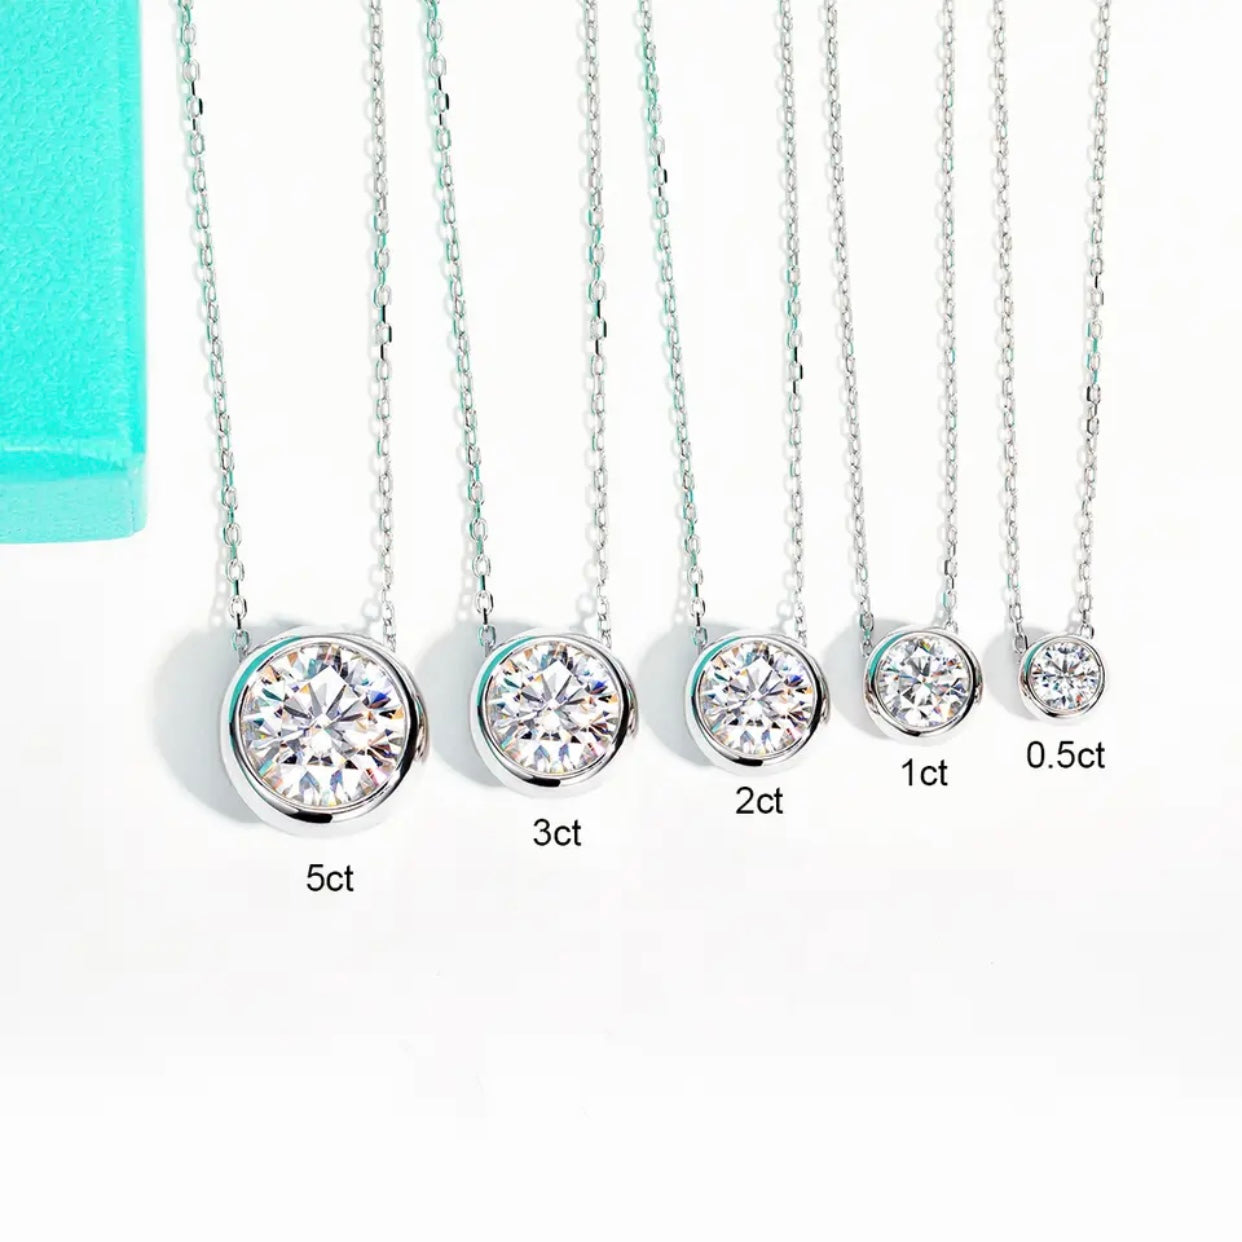 ADELINA STERLING SILVER MOISSANITE PENDENT NECKLACE